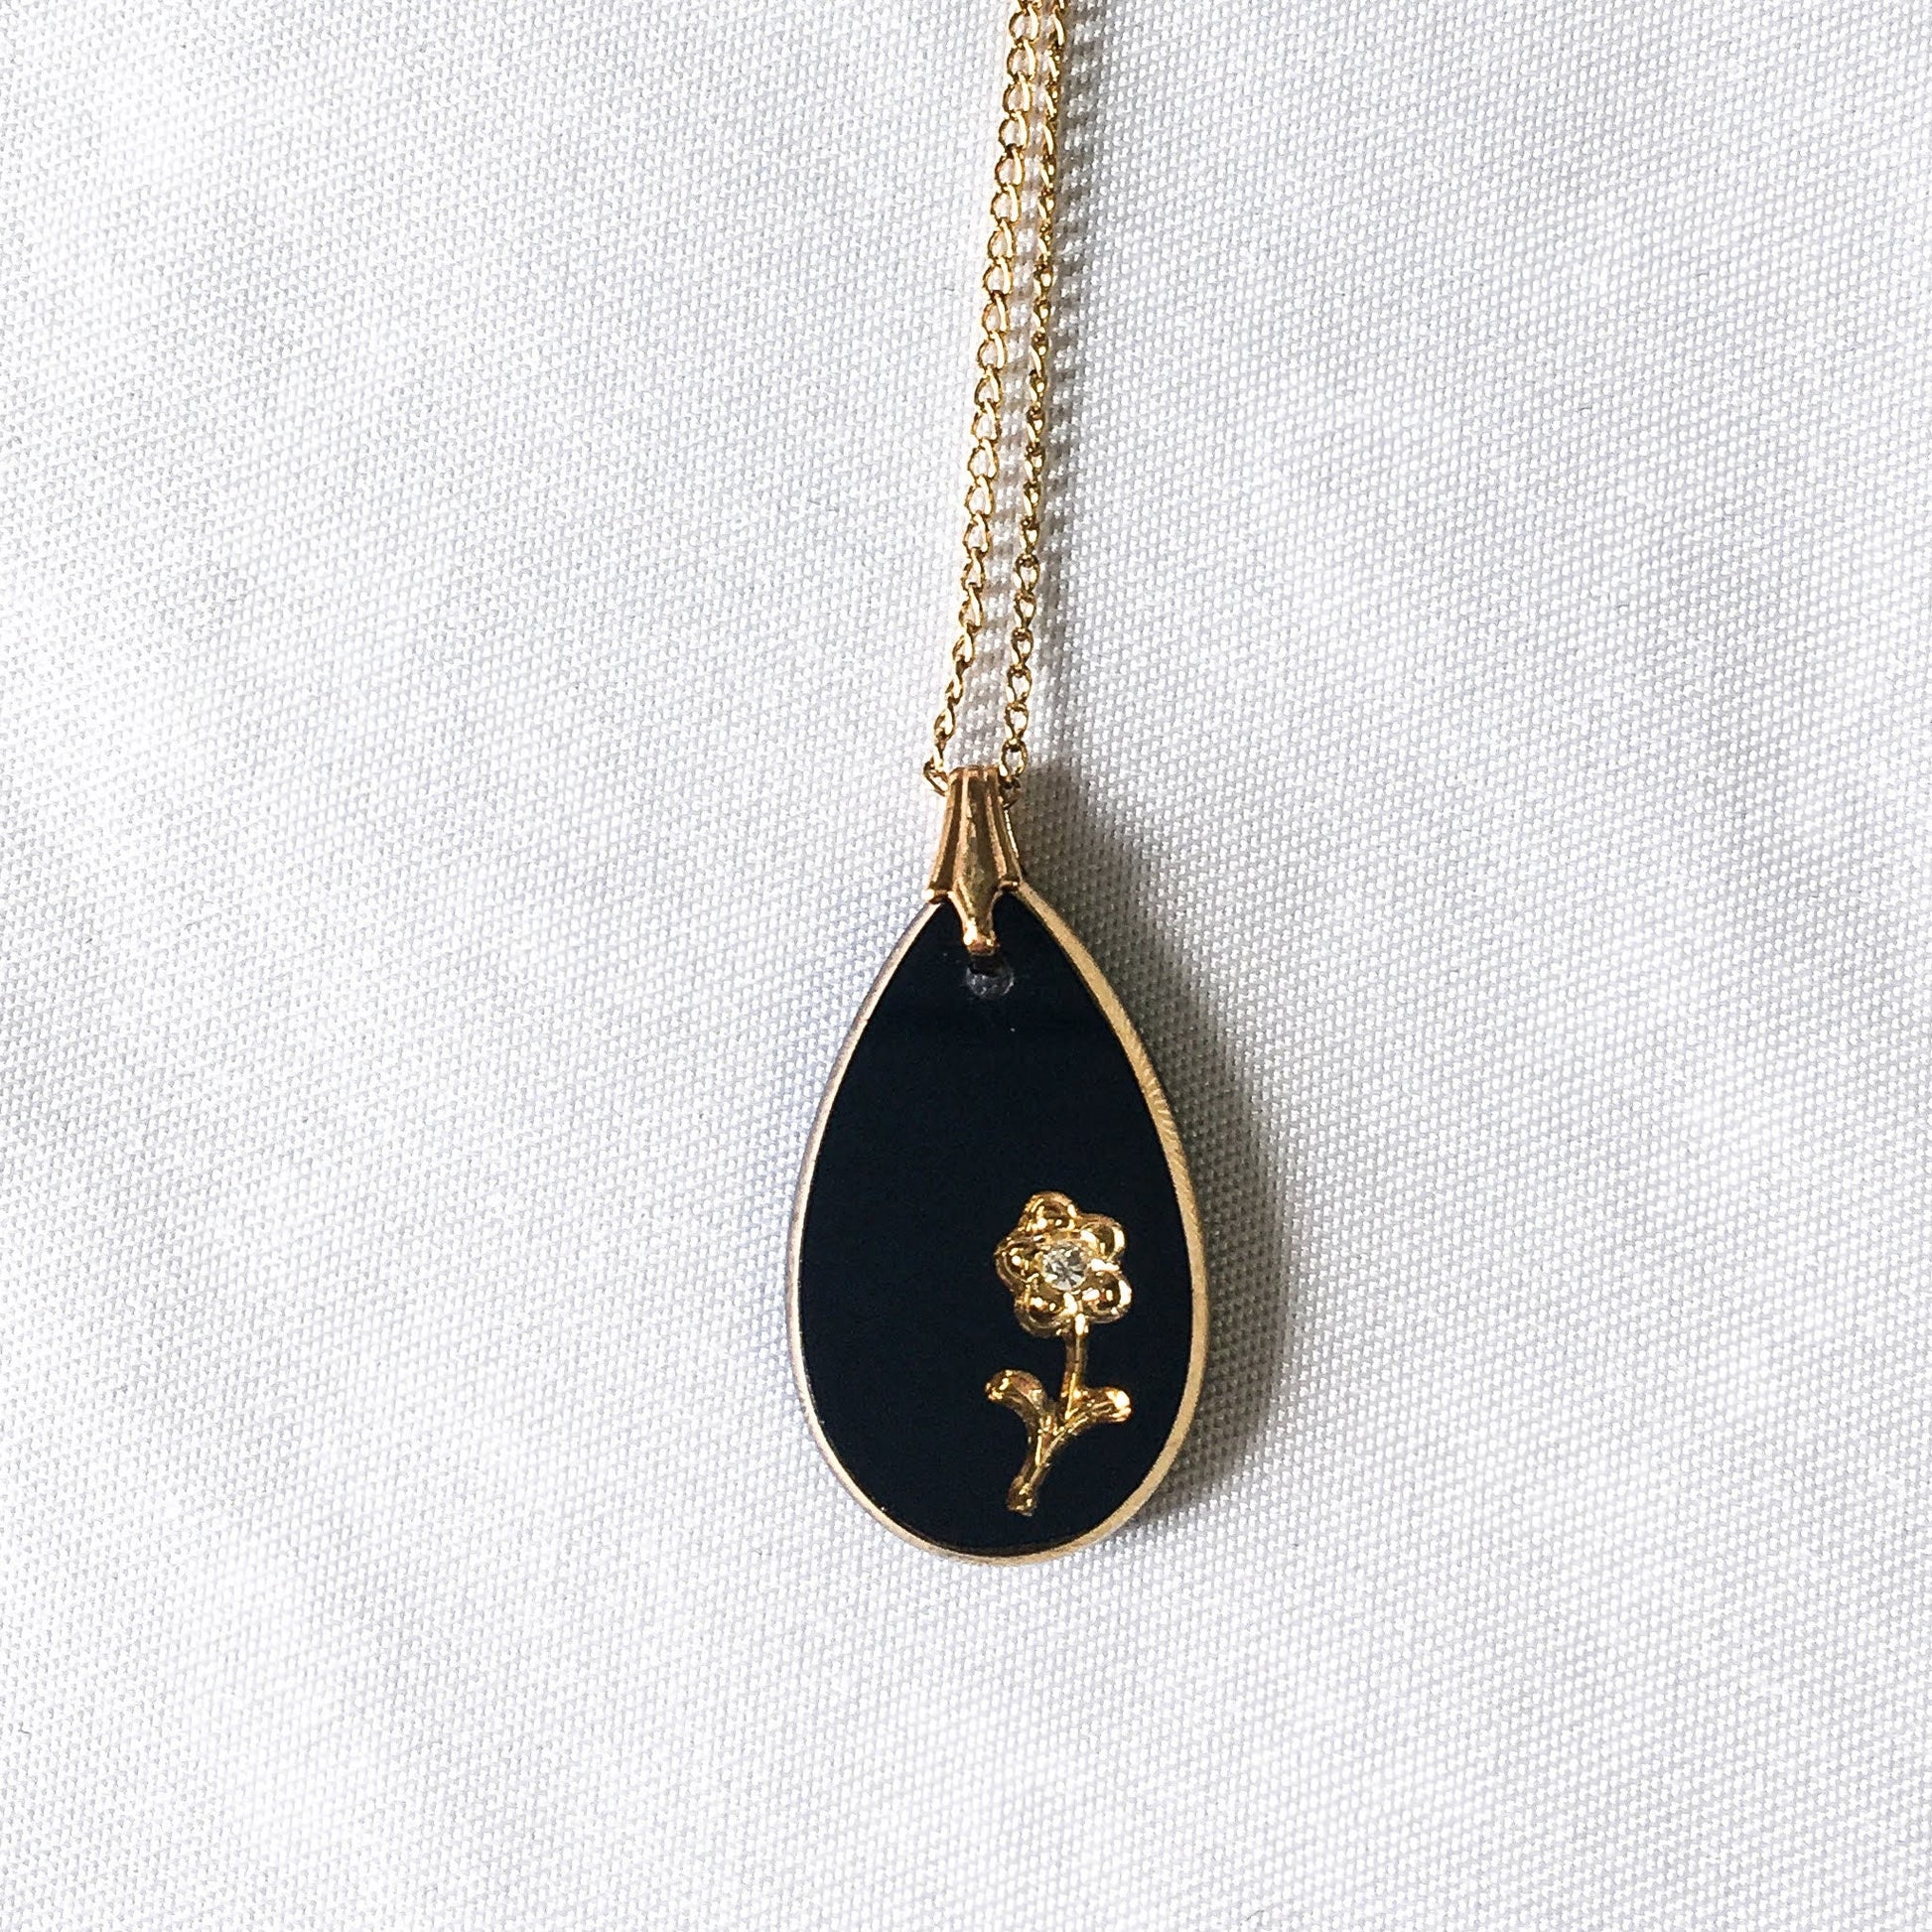 Vintage Black and Gold Tone Pendant with Rhinestone Flower on 12k Gold Filled Chain, Vintage Pendant Necklace